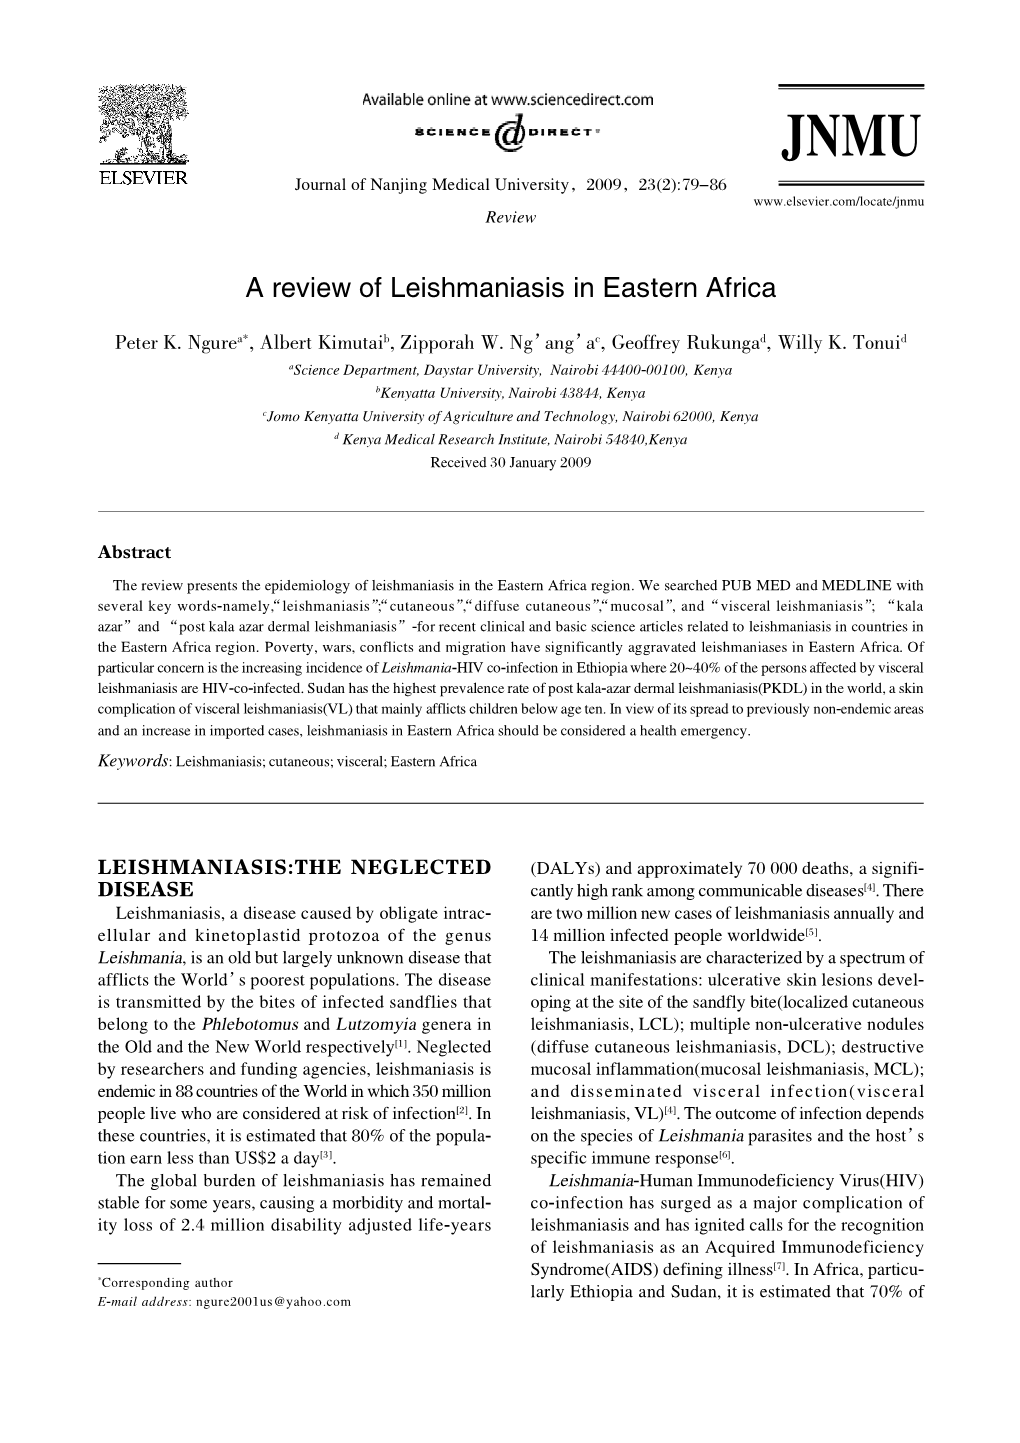 A Review of Leishmaniasis in Eastern Africa